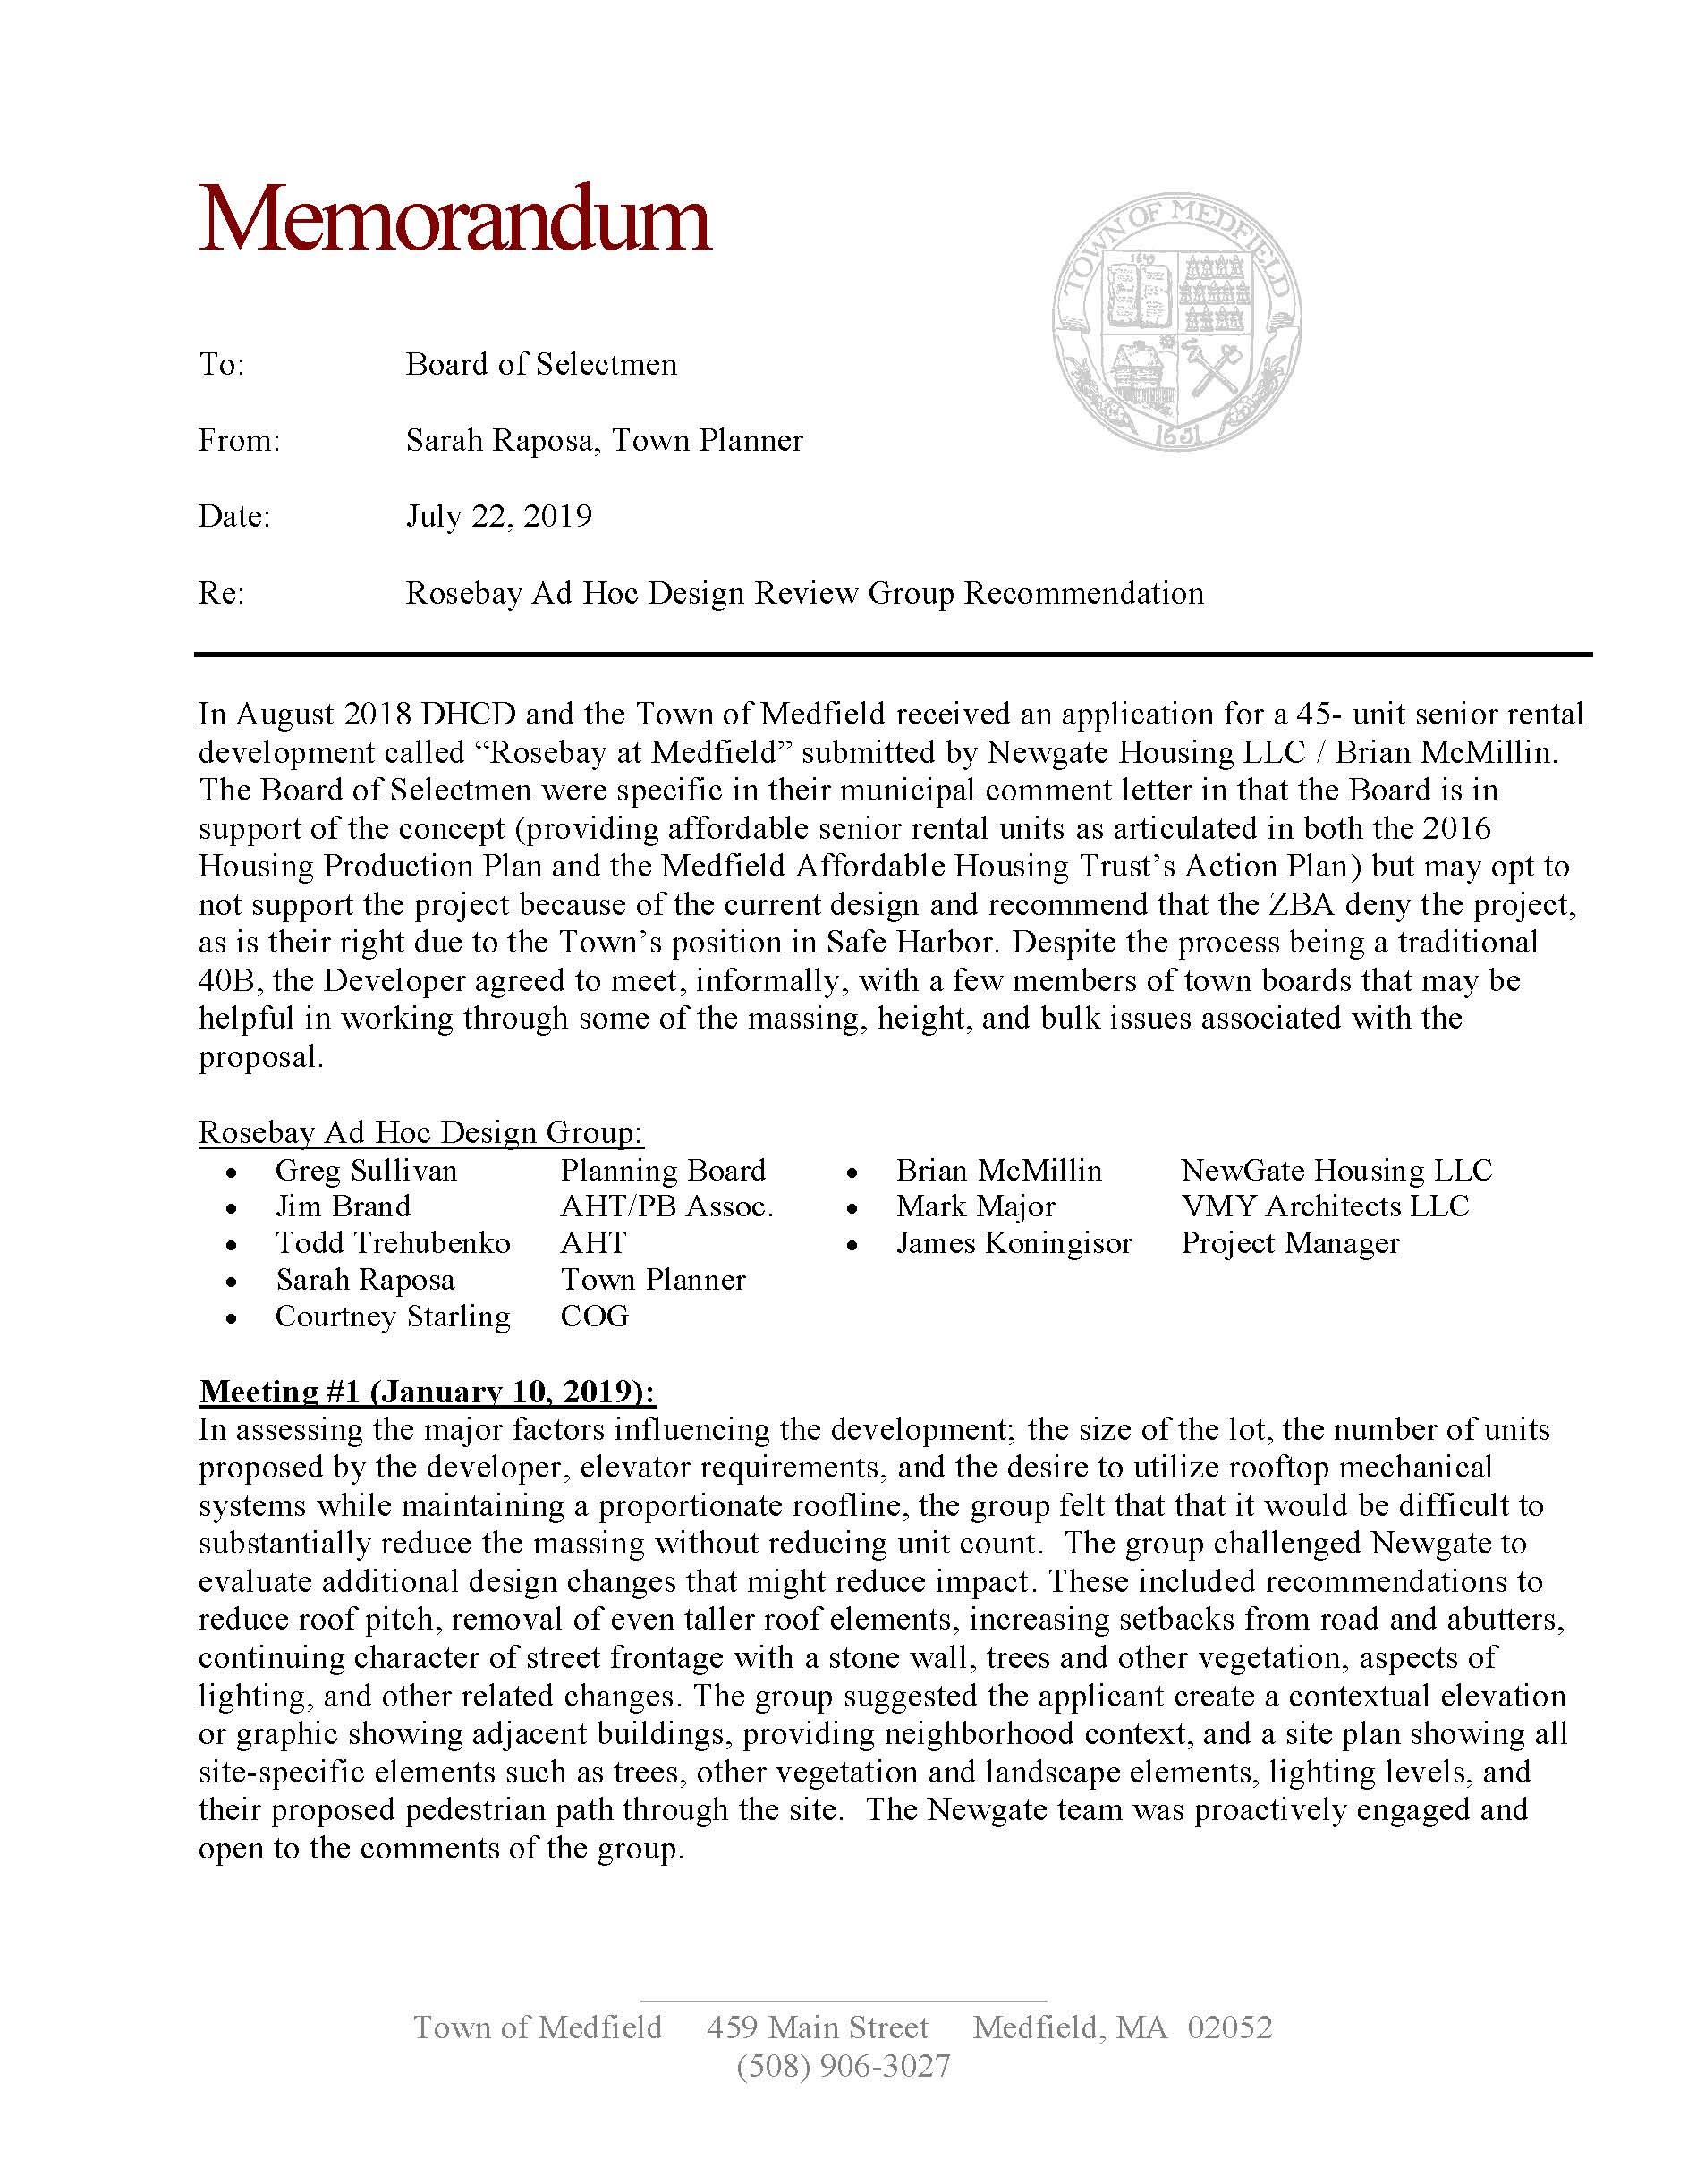 Town of Medfield 459 Main Street Medfield, MA 02052 (508) 906-3027 Memorandum To: Board of Selectmen From: Sarah Raposa, Town Planner Date: July 22, 2019 Re: Rosebay Ad Hoc Design Review Group Recommendation In August 2018 DHCD and the Town of Medfield received an application for a 45- unit senior rental development called “Rosebay at Medfield” submitted by Newgate Housing LLC / Brian McMillin. The Board of Selectmen were specific in their municipal comment letter in that the Board is in support of the concept (providing affordable senior rental units as articulated in both the 2016 Housing Production Plan and the Medfield Affordable Housing Trust’s Action Plan) but may opt to not support the project because of the current design and recommend that the ZBA deny the project, as is their right due to the Town’s position in Safe Harbor. Despite the process being a traditional 40B, the Developer agreed to meet, informally, with a few members of town boards that may be helpful in working through some of the massing, height, and bulk issues associated with the proposal. Rosebay Ad Hoc Design Group:  Greg Sullivan Planning Board  Brian McMillin NewGate Housing LLC  Jim Brand AHT/PB Assoc.  Mark Major VMY Architects LLC  Todd Trehubenko AHT  James Koningisor Project Manager  Sarah Raposa Town Planner  Courtney Starling COG Meeting #1 (January 10, 2019): In assessing the major factors influencing the development; the size of the lot, the number of units proposed by the developer, elevator requirements, and the desire to utilize rooftop mechanical systems while maintaining a proportionate roofline, the group felt that that it would be difficult to substantially reduce the massing without reducing unit count. The group challenged Newgate to evaluate additional design changes that might reduce impact. These included recommendations to reduce roof pitch, removal of even taller roof elements, increasing setbacks from road and abutters, continuing character of street frontage with a stone wall, trees and other vegetation, aspects of lighting, and other related changes. The group suggested the applicant create a contextual elevation or graphic showing adjacent buildings, providing neighborhood context, and a site plan showing all site-specific elements such as trees, other vegetation and landscape elements, lighting levels, and their proposed pedestrian path through the site. The Newgate team was proactively engaged and open to the comments of the group. Town of Medfield 459 Main Street Medfield, MA 02052 (508) 906-3027 Meeting #2 (May 2, 2019): The Newgate team presented revised plans, elevations and neighborhood context graphics that included design changes that addressed in actuality or the spirit of the comments of the Design Review Group. The following changes and clarifications were made to the proposal: 1. The front setback from Pound Street was revised from 30.5’ to 60.4’. This is twice the required setback in the RU zoning district. 2. The building height was reduced by 10’ to 40’. The zoning bylaw allows a height up to 35’ for multifamily use in the RU district so this would be a 5’ waiver request. 3. The gross building area was reduced by more than 2,000 square feet (from 50,670 sf to 48,524 sf). 4. The distance to neighboring buildings is shown on the revised site plan indicating compliance with the side setback requirements in the RU zoning district. 5. The walking path from Pound Street to the High School/Middle School is proposed as stone dust. 6. An 8’ privacy fence is proposed between walking path and the adjacent historic property at 58 Pound Street. 7. As requested, the Developer submitted landscaping and lighting plans. The landscaping plan provides context on the preservation of existing vegetation and proposed additional screening. The lighting plan confirms no unnecessary light-spillage over the property line. 8. Additional handicapped parking spaces were provided based on comments from the Fire Department. 9. An outdoor trash enclosure was eliminated from the plan because this building has interior trash and recycling facilities on each floor. 10. Certain exterior architectural elements were added or enhanced to improve the appearance of the building, maintain visual interest, and create character on the building’s elevations. 11. Interior changes include a revised layout of the first floor front and rear entries, lobby area, and amenity spaces to improve the flow of foot traffic and to provide for flow through from front entrance to rear entrance; as well as corrected unit plans. The developer provided additional renderings that provided context with the neighborhood. This area is transitional and includes single family dwellings, multi-family dwellings and institutional structures (high school/middle school complex). The viewpoint looking down Pound Street from South Street still reflects a significant development, but is an improvement considering the previous building. From the other direction, the building is closely abutted to Tilden Village. Conclusion: The Ad Hoc Design Review Group recognizes the position decision that the Board of Selectmen need to make relative to this project, senior affordable housing, and the impacted neighborhood. The group has worked to openly review the design and make recommendations that allowed the developer to put forward the best version of their proposal, and conversely Newgate has been open to the recommendations suggested and have made improvements to their proposed development. We appreciate the BoS taking this into consideration as they assess the current design as this moves forward with the Zoning Board of Appeals process.